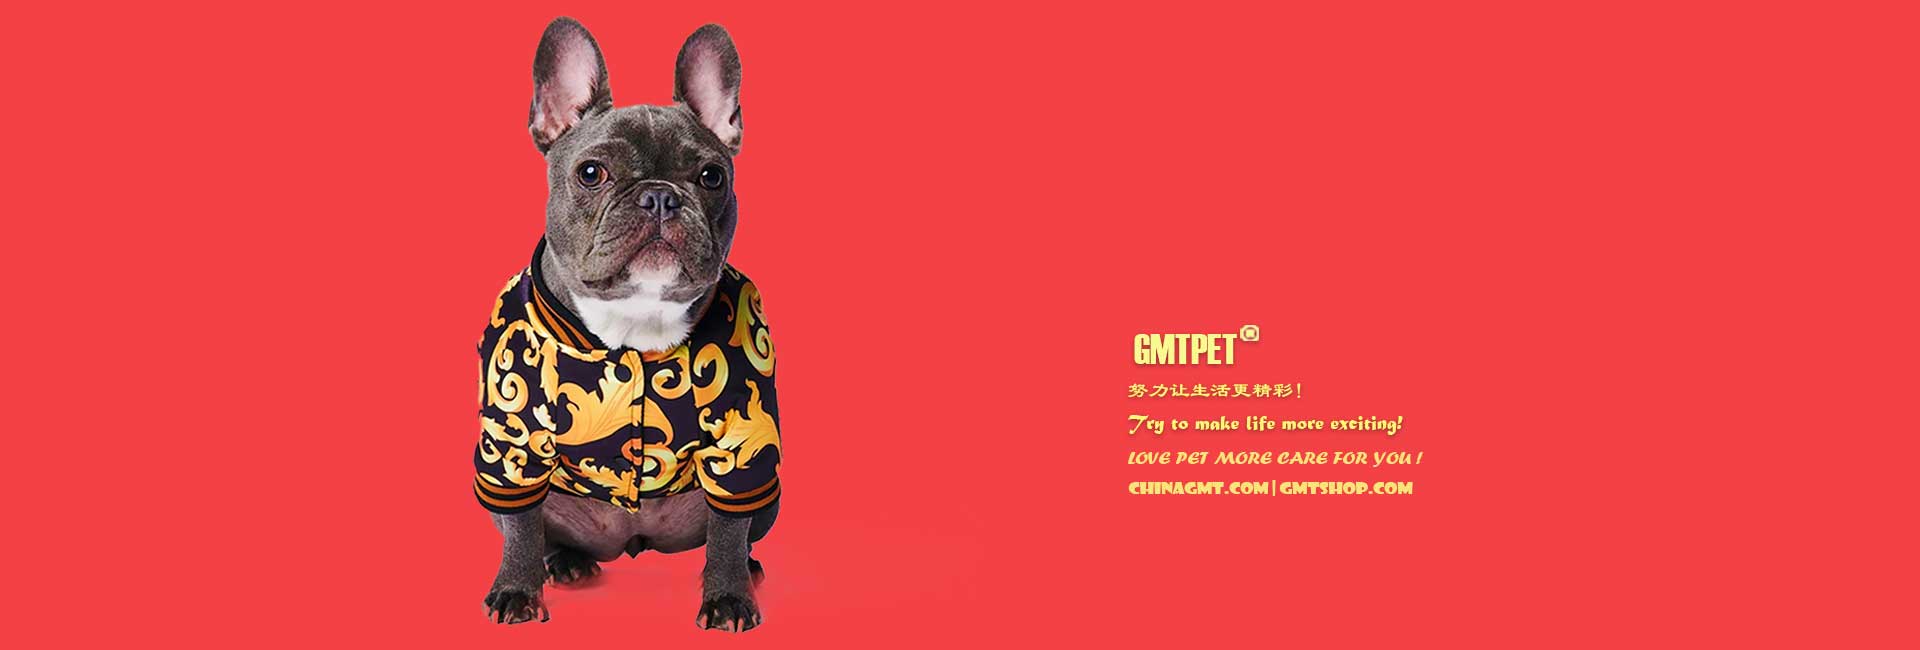 Dog Apparel Products Pet Clothes Accessories Factory Manufacturers & Supplier China on gmtshop.com-1920x650